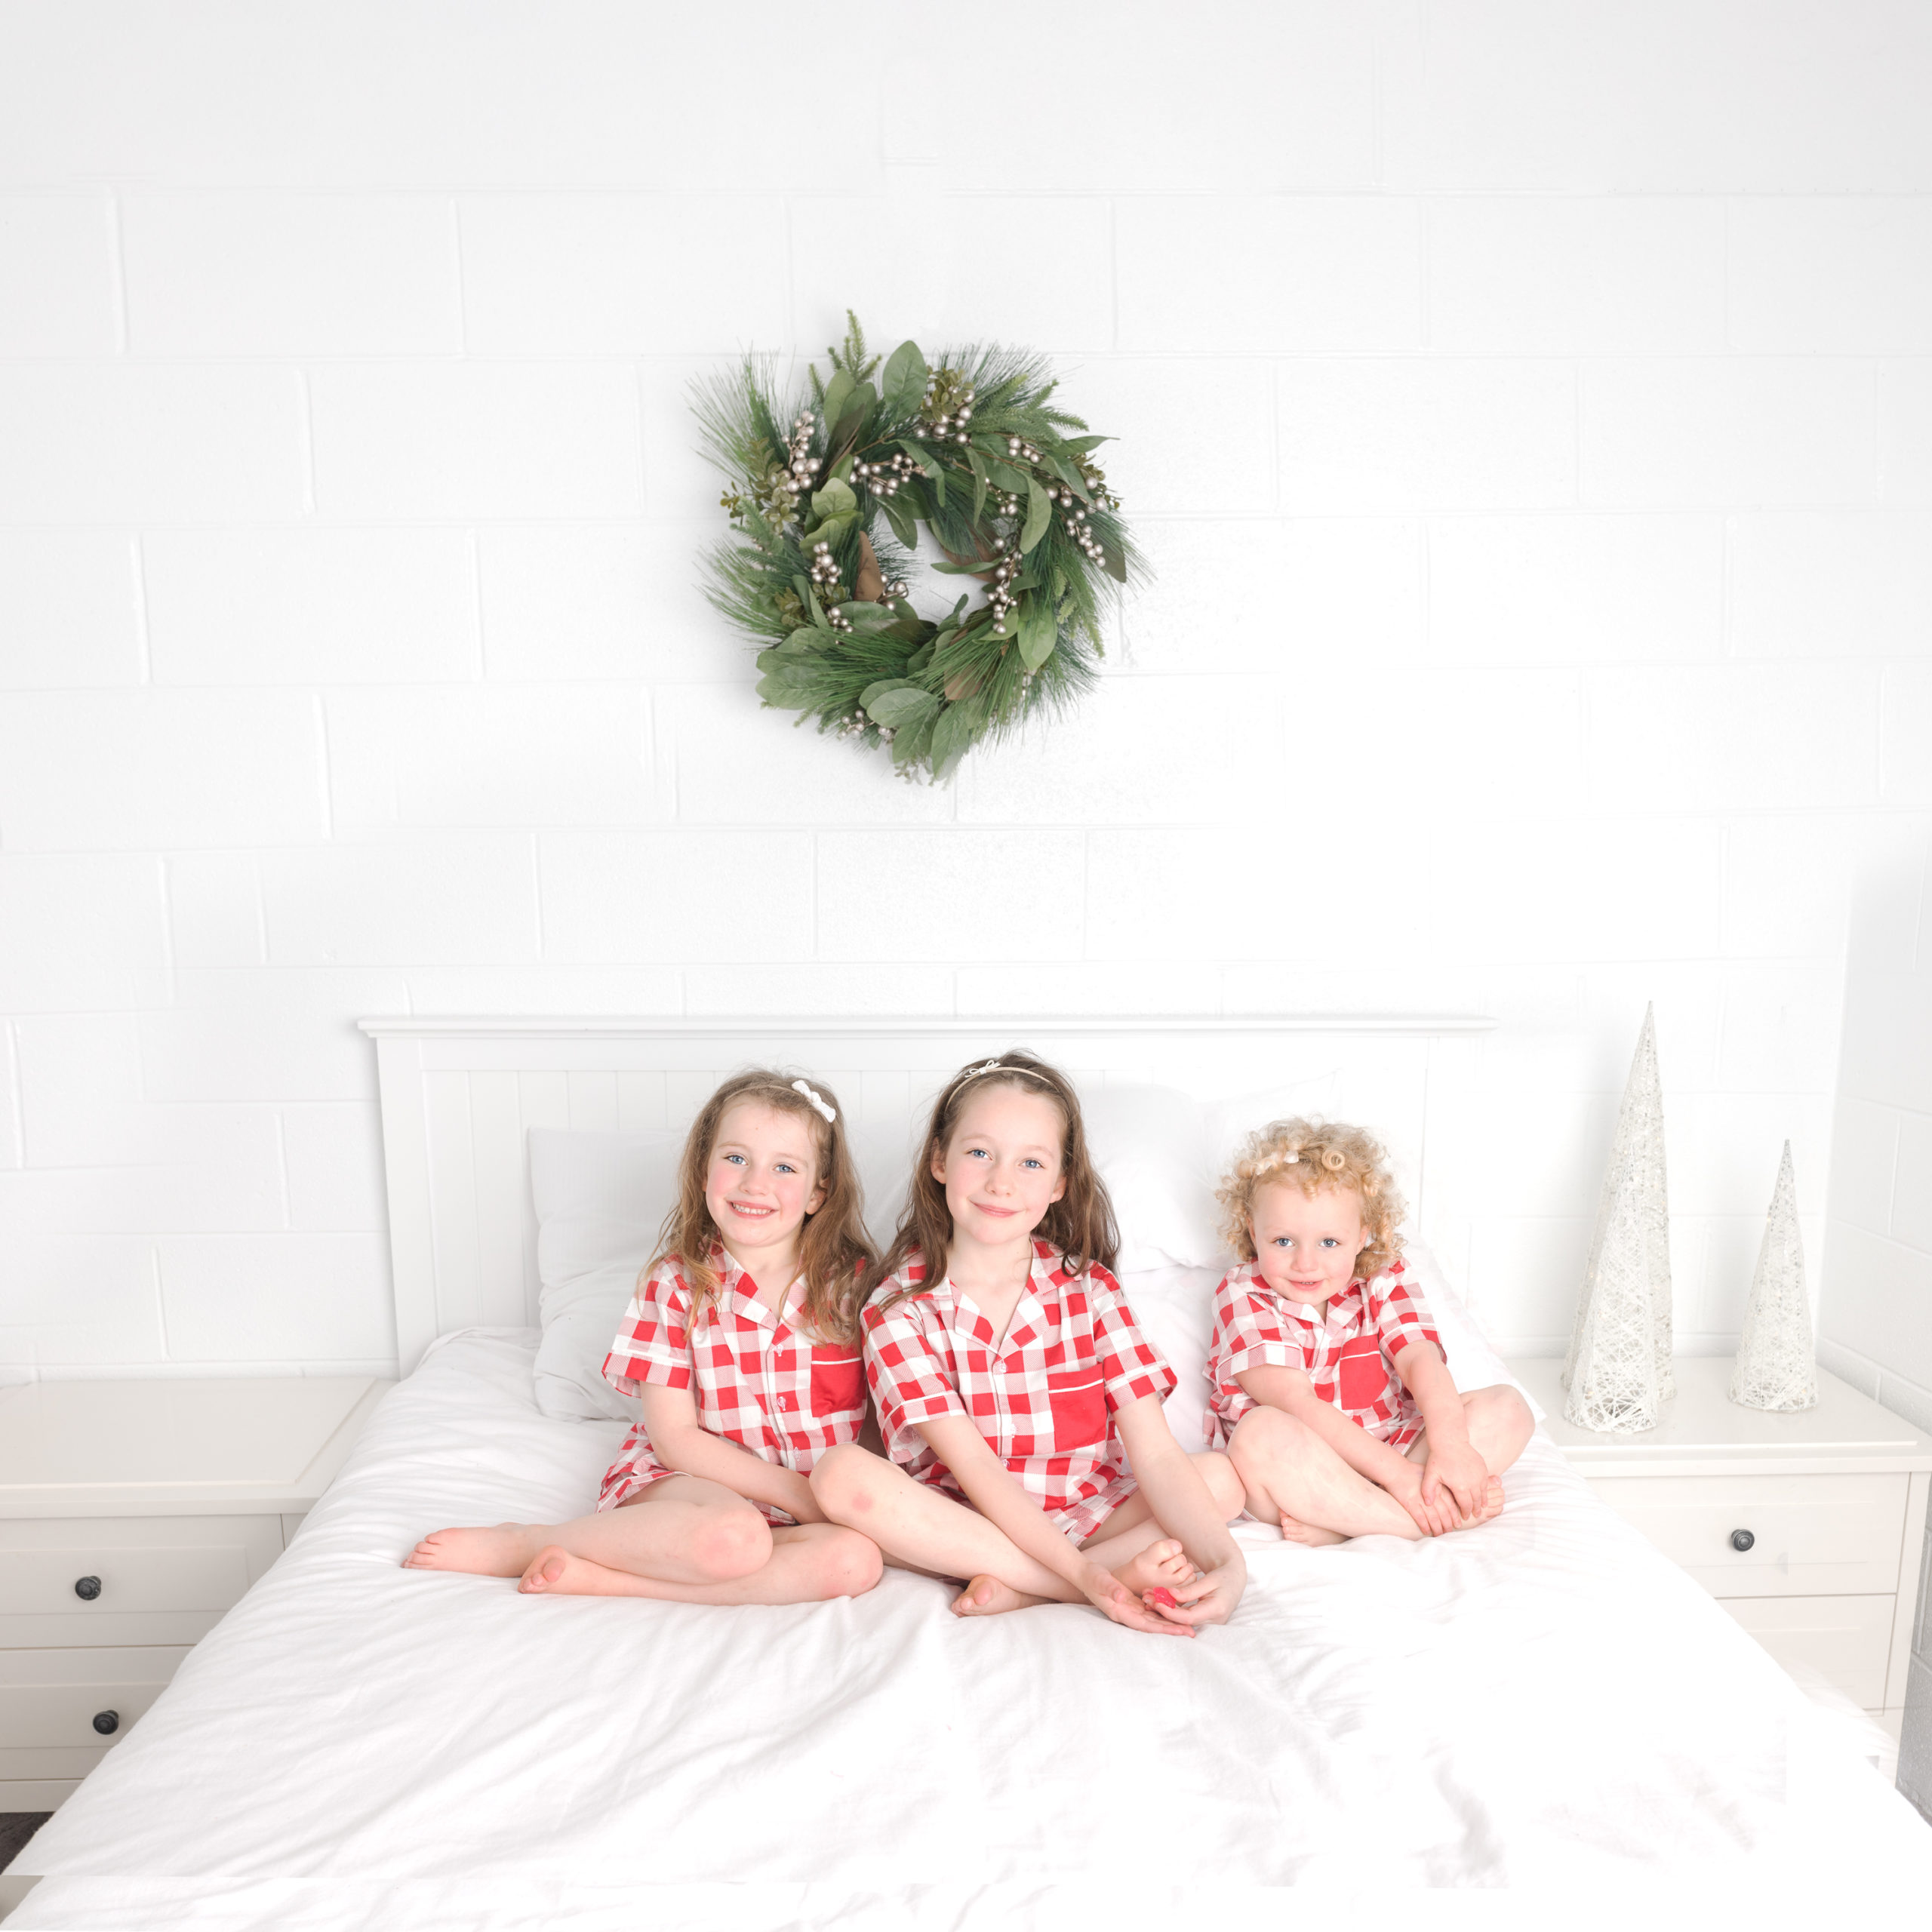 3 children sitting on a bed posing for a christmas themed photoshoot while wearing christmas pajamas. There is a wreath on the wall in the background and the photo is captured by Lauren Vanier Photography in Hobart